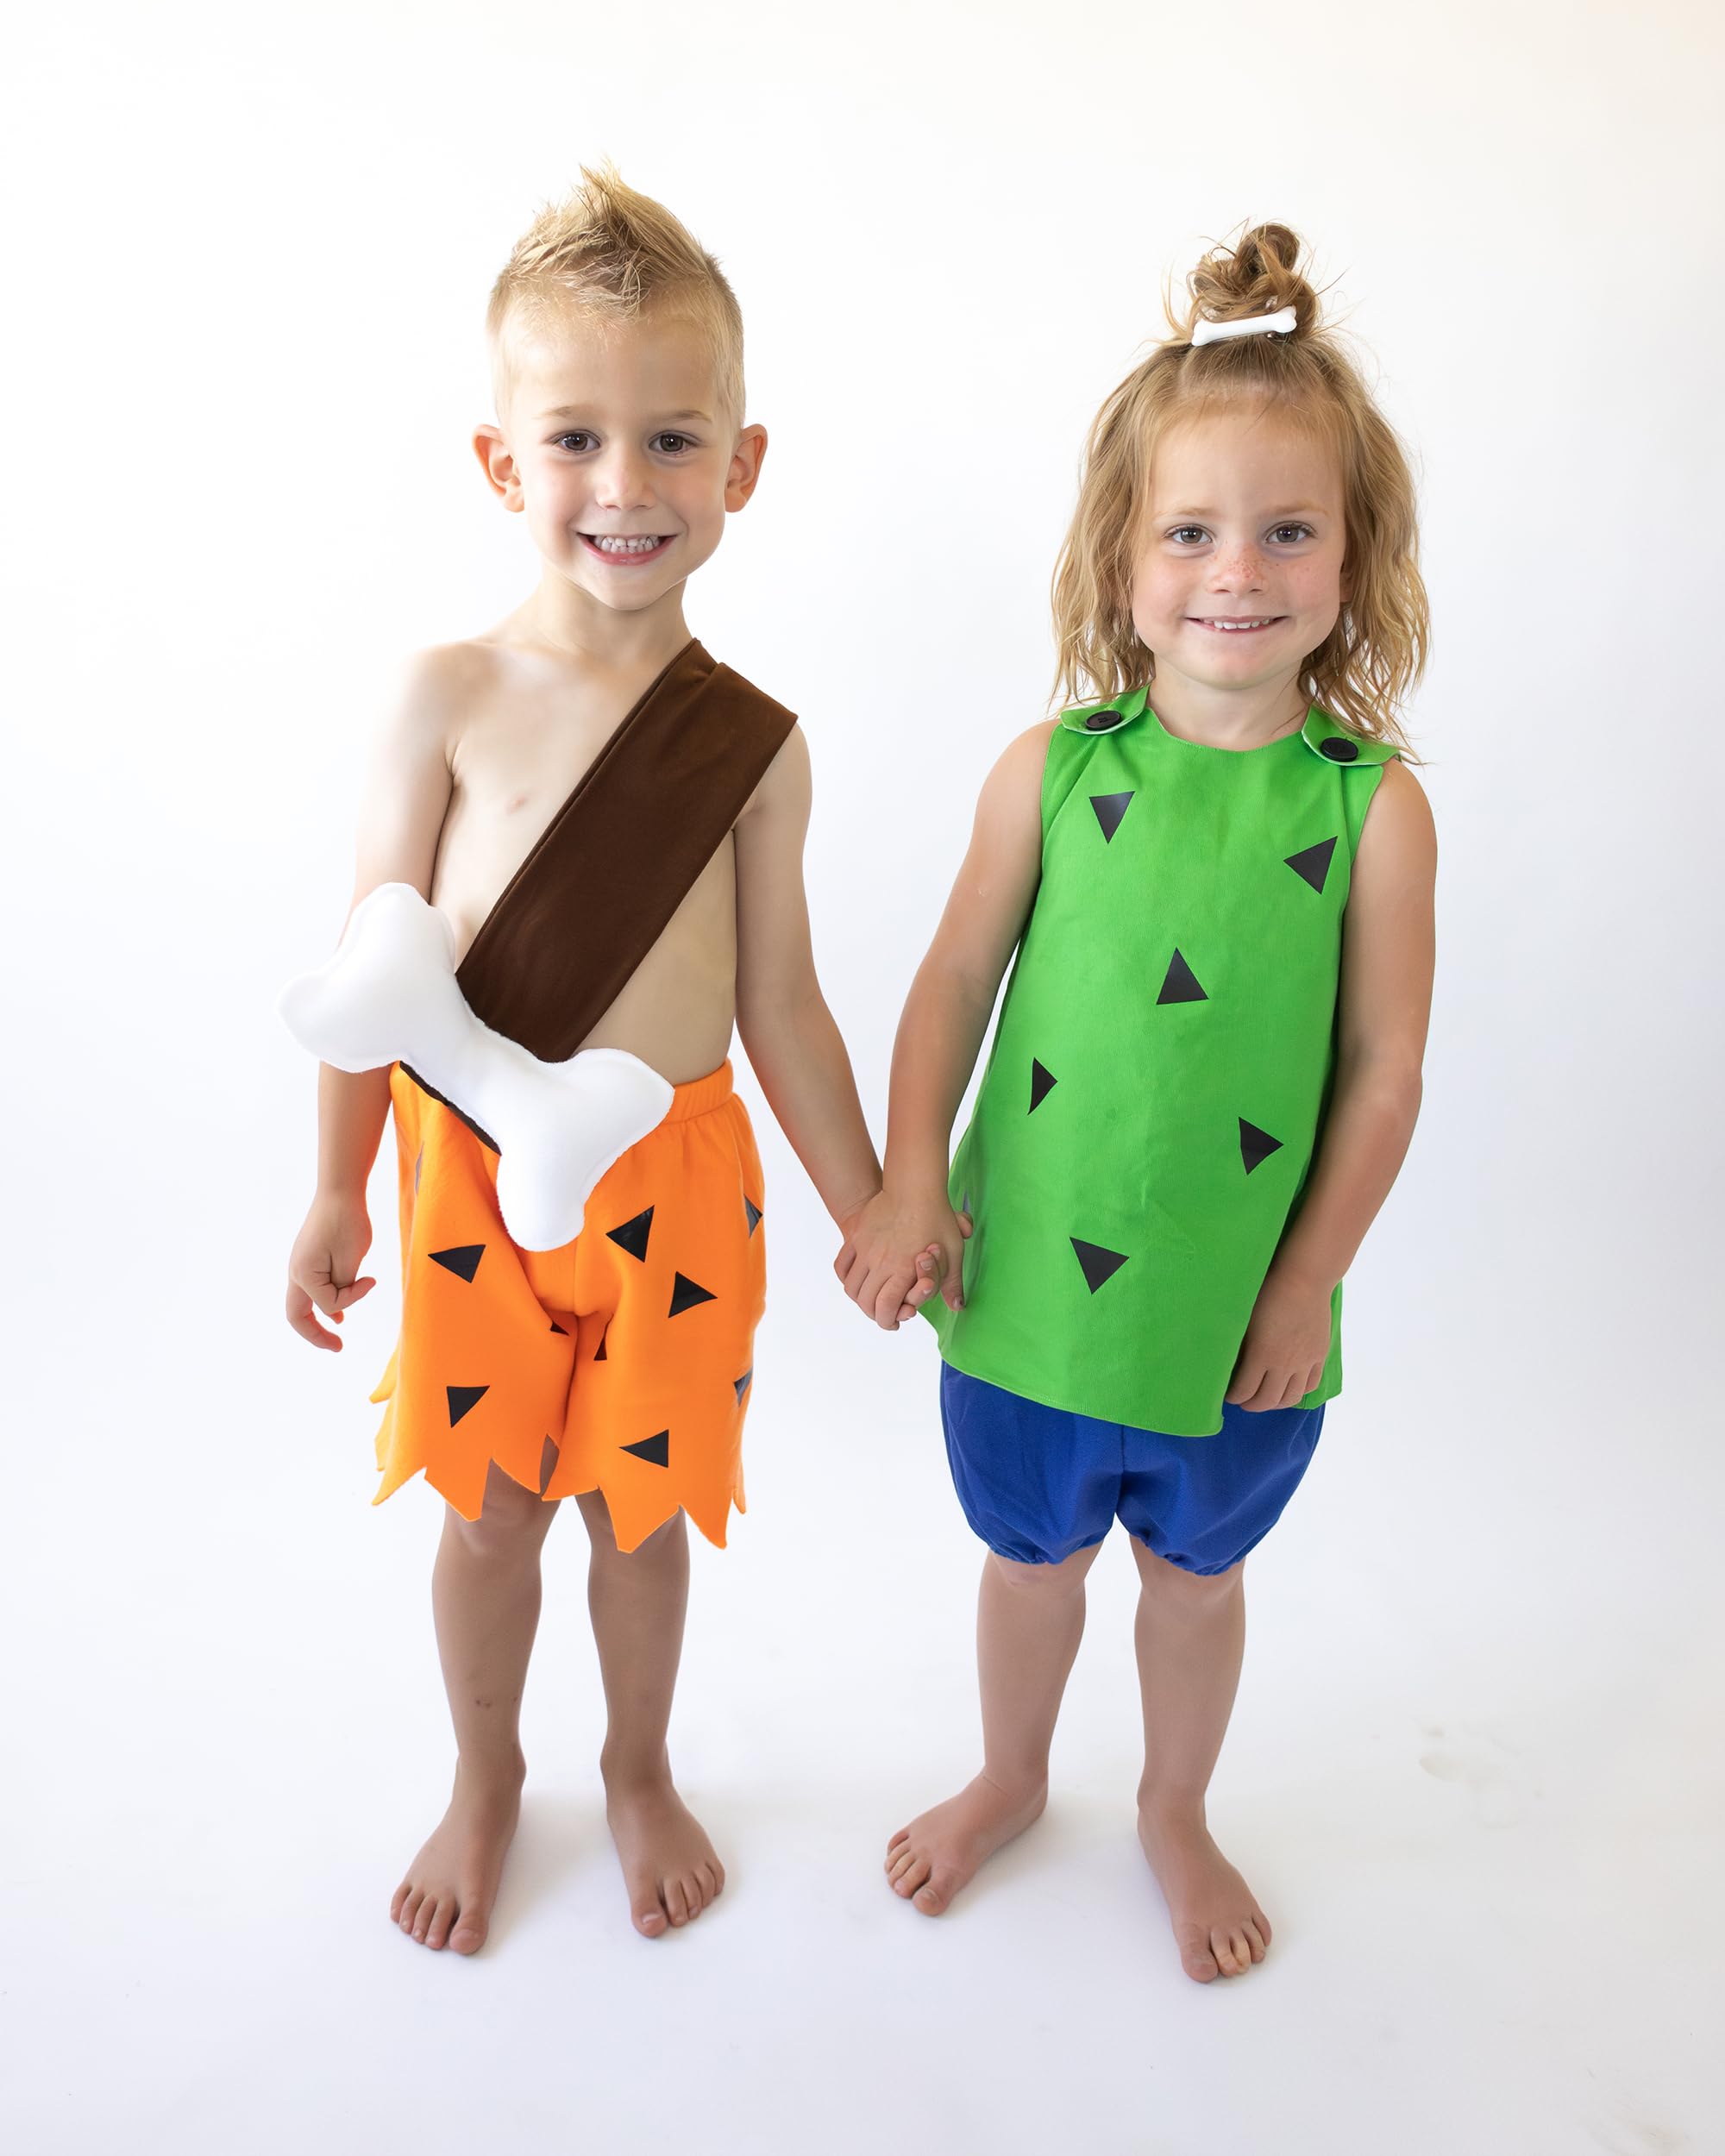 Caveman Pebbles Bam Bam Costume Outfit for Toddler Girls and Boys